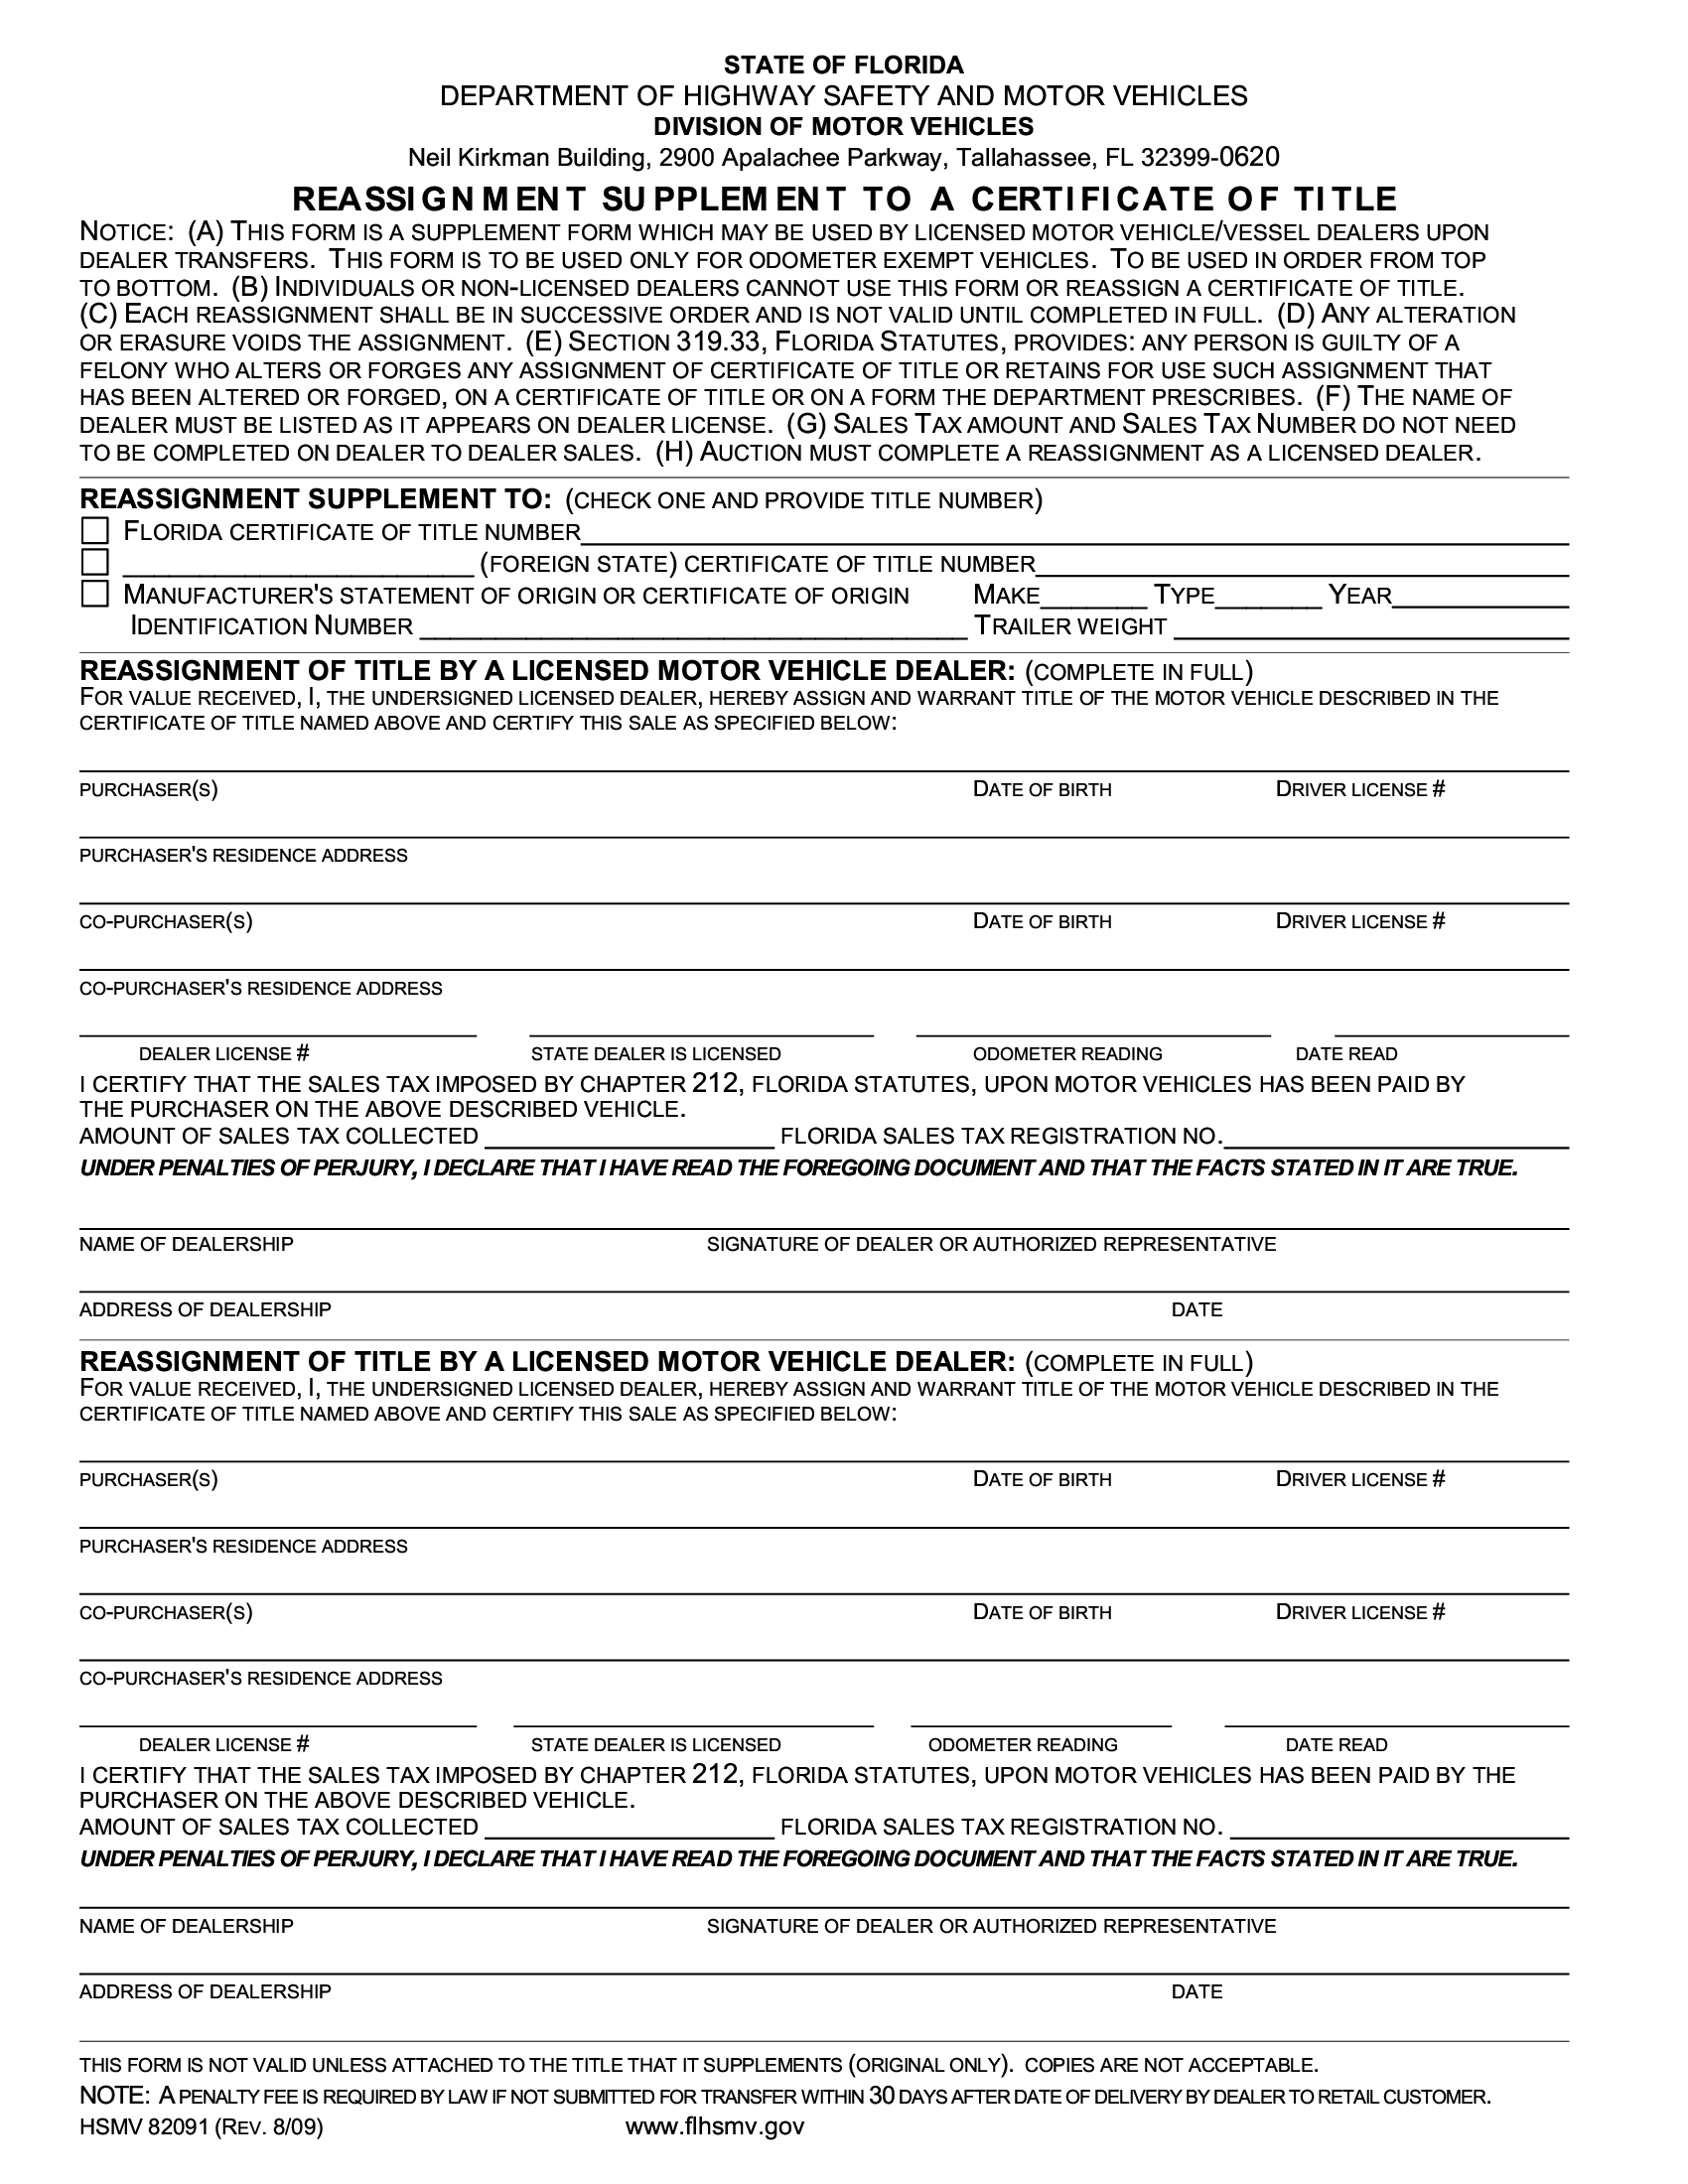 form-hsmv-82091-reassignment-supplement-to-a-certificate-of-title